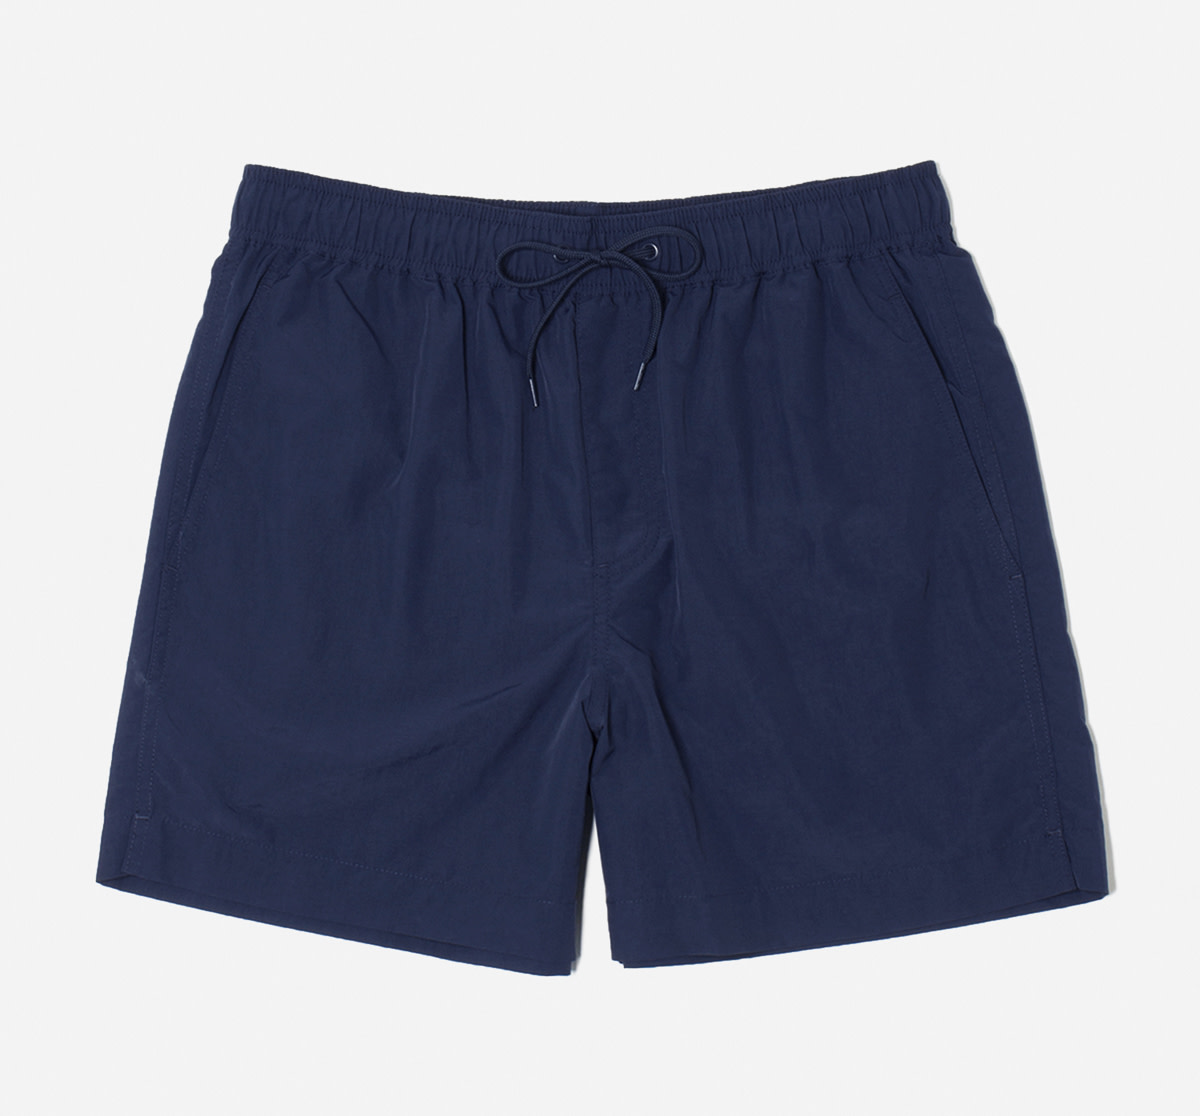 Summer's officially here, time to throw your trunks on - Acquire